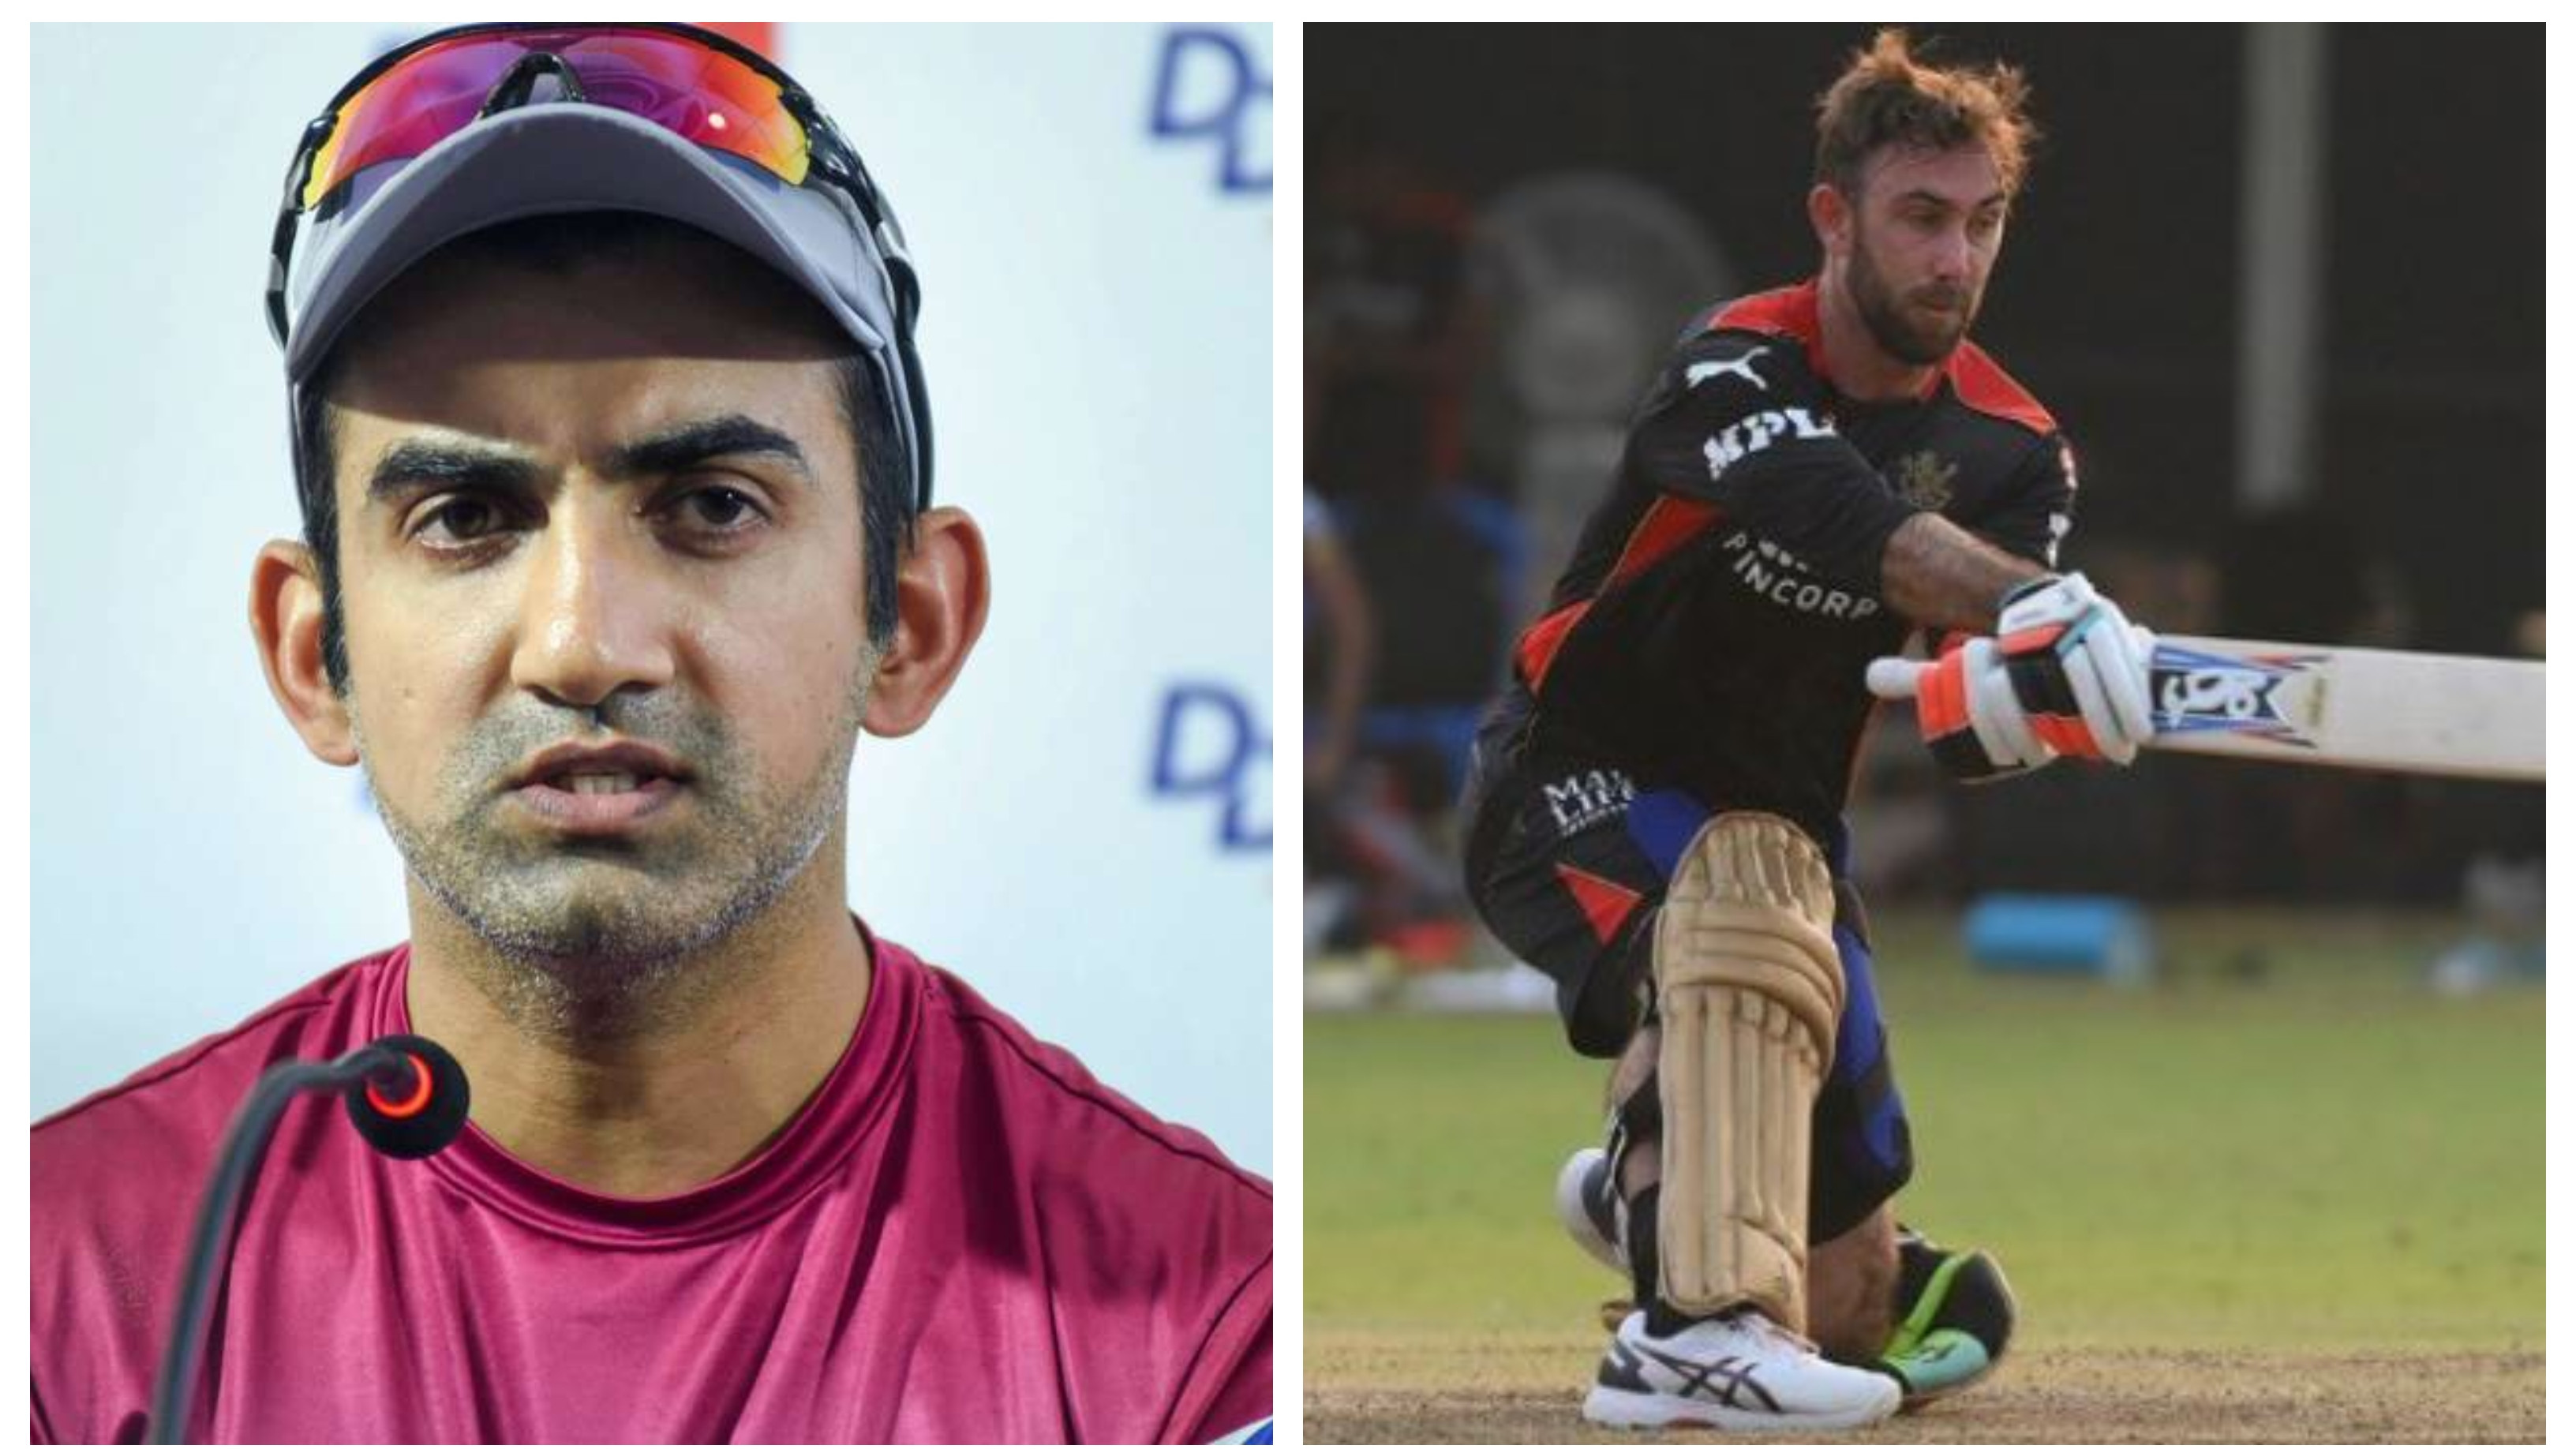 IPL 2021: ‘Franchise releases you because you haven't performed’, Gambhir critical of Maxwell’s showing in IPL